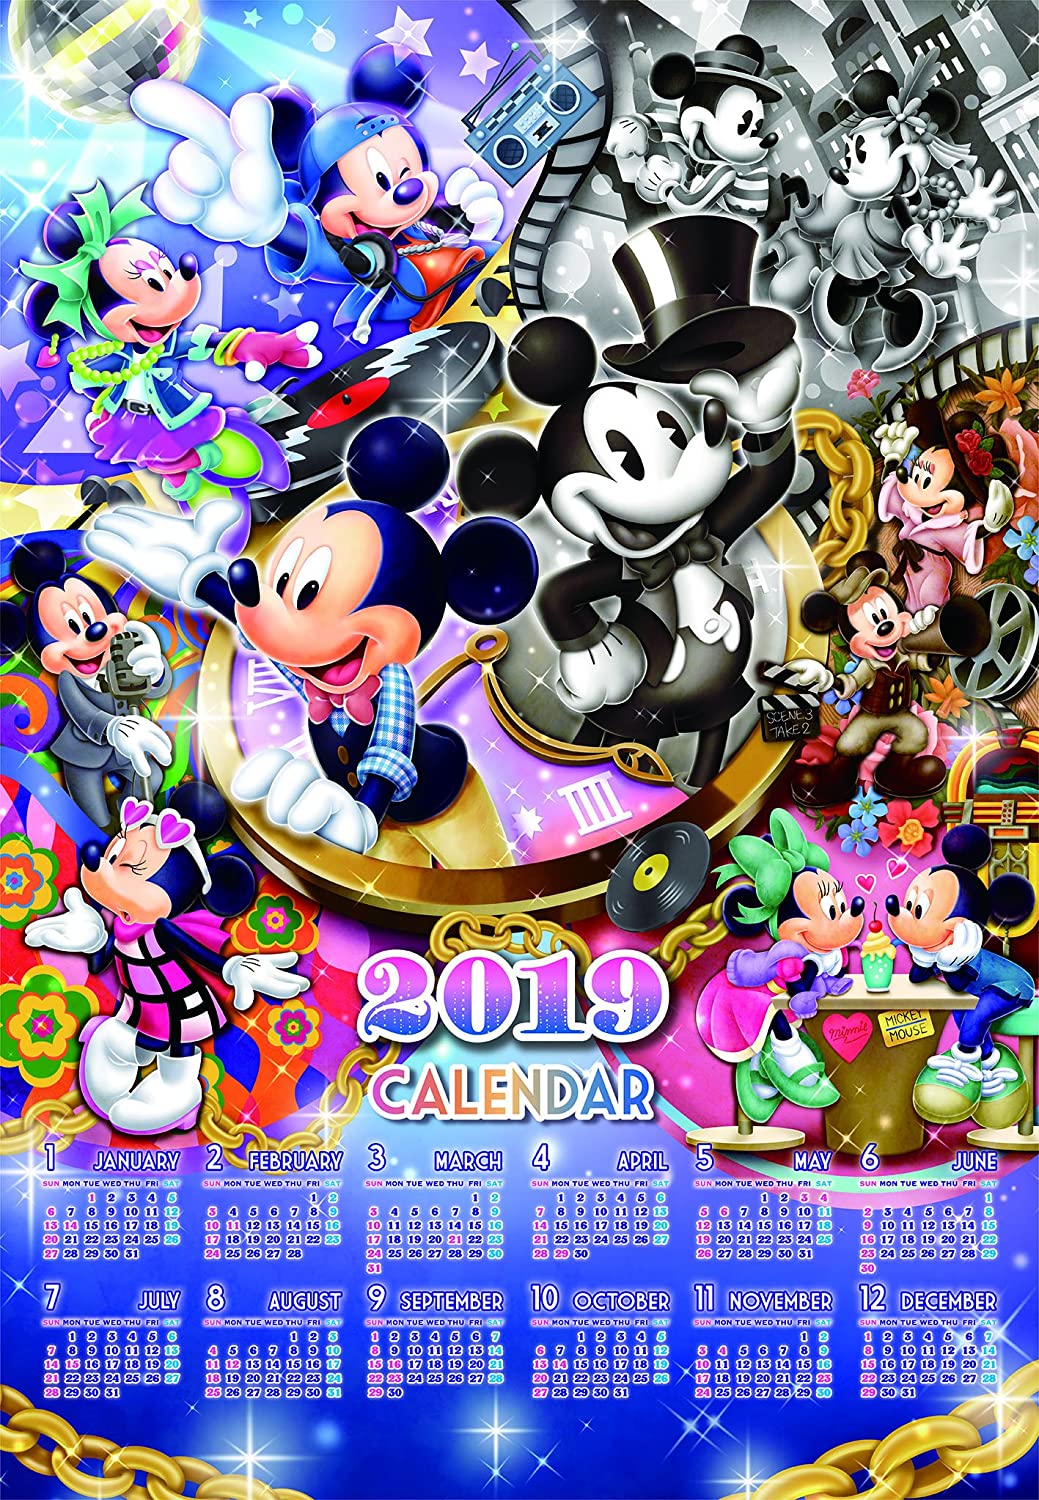 1000 piece Tenyo Jigsaw Puzzle Disney Royal Garden with Love Micky and Minnie T# 